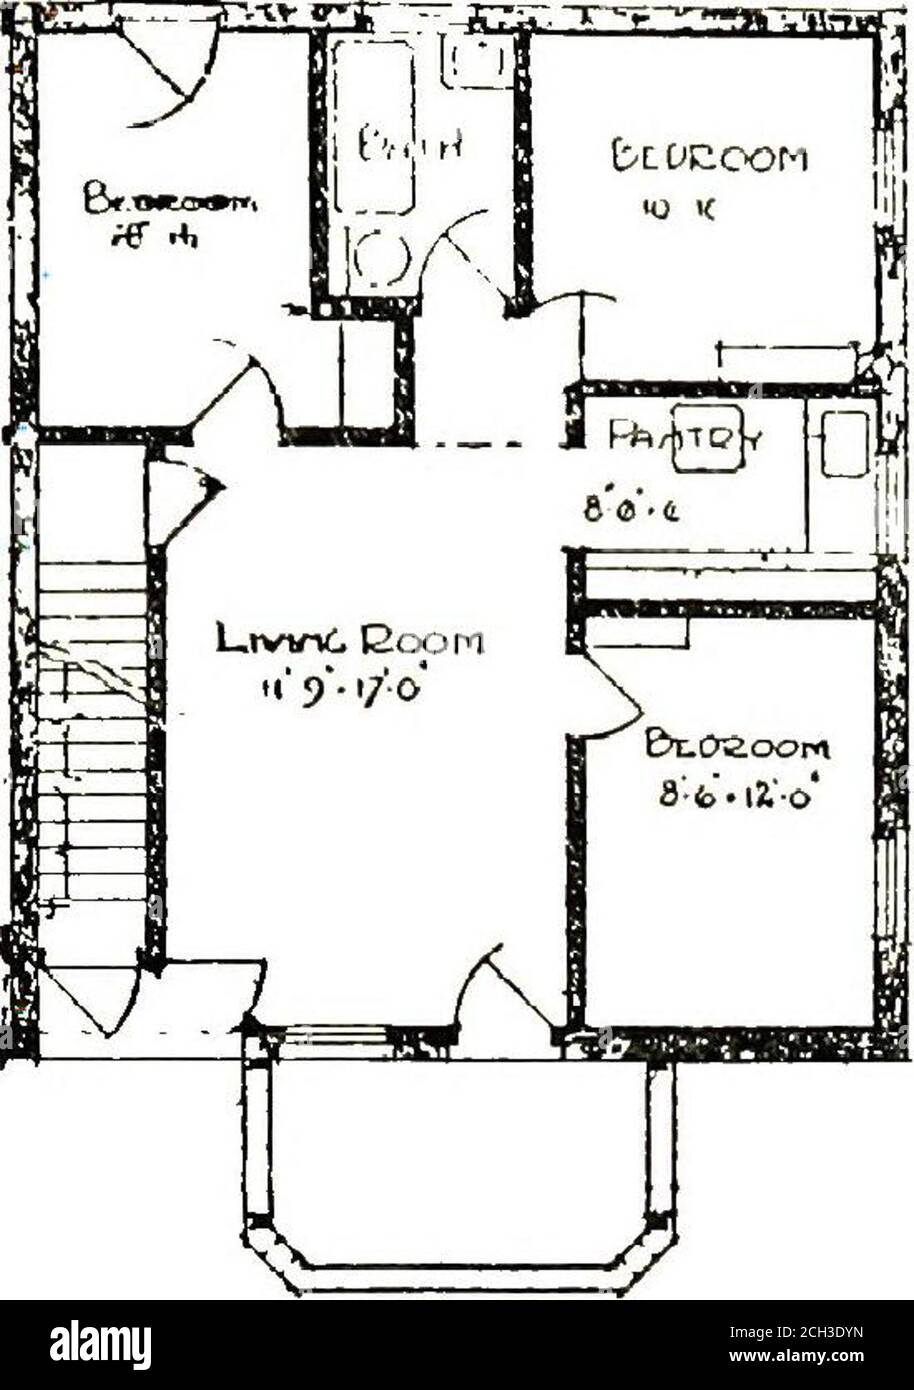 Report of the Board . NO. 4 THREE BEDROOMSNext larger Flat and an Attic  NOTE—One Bedroom added to the JJving Room21 Flats of this type are being  built at Bain Avenue.